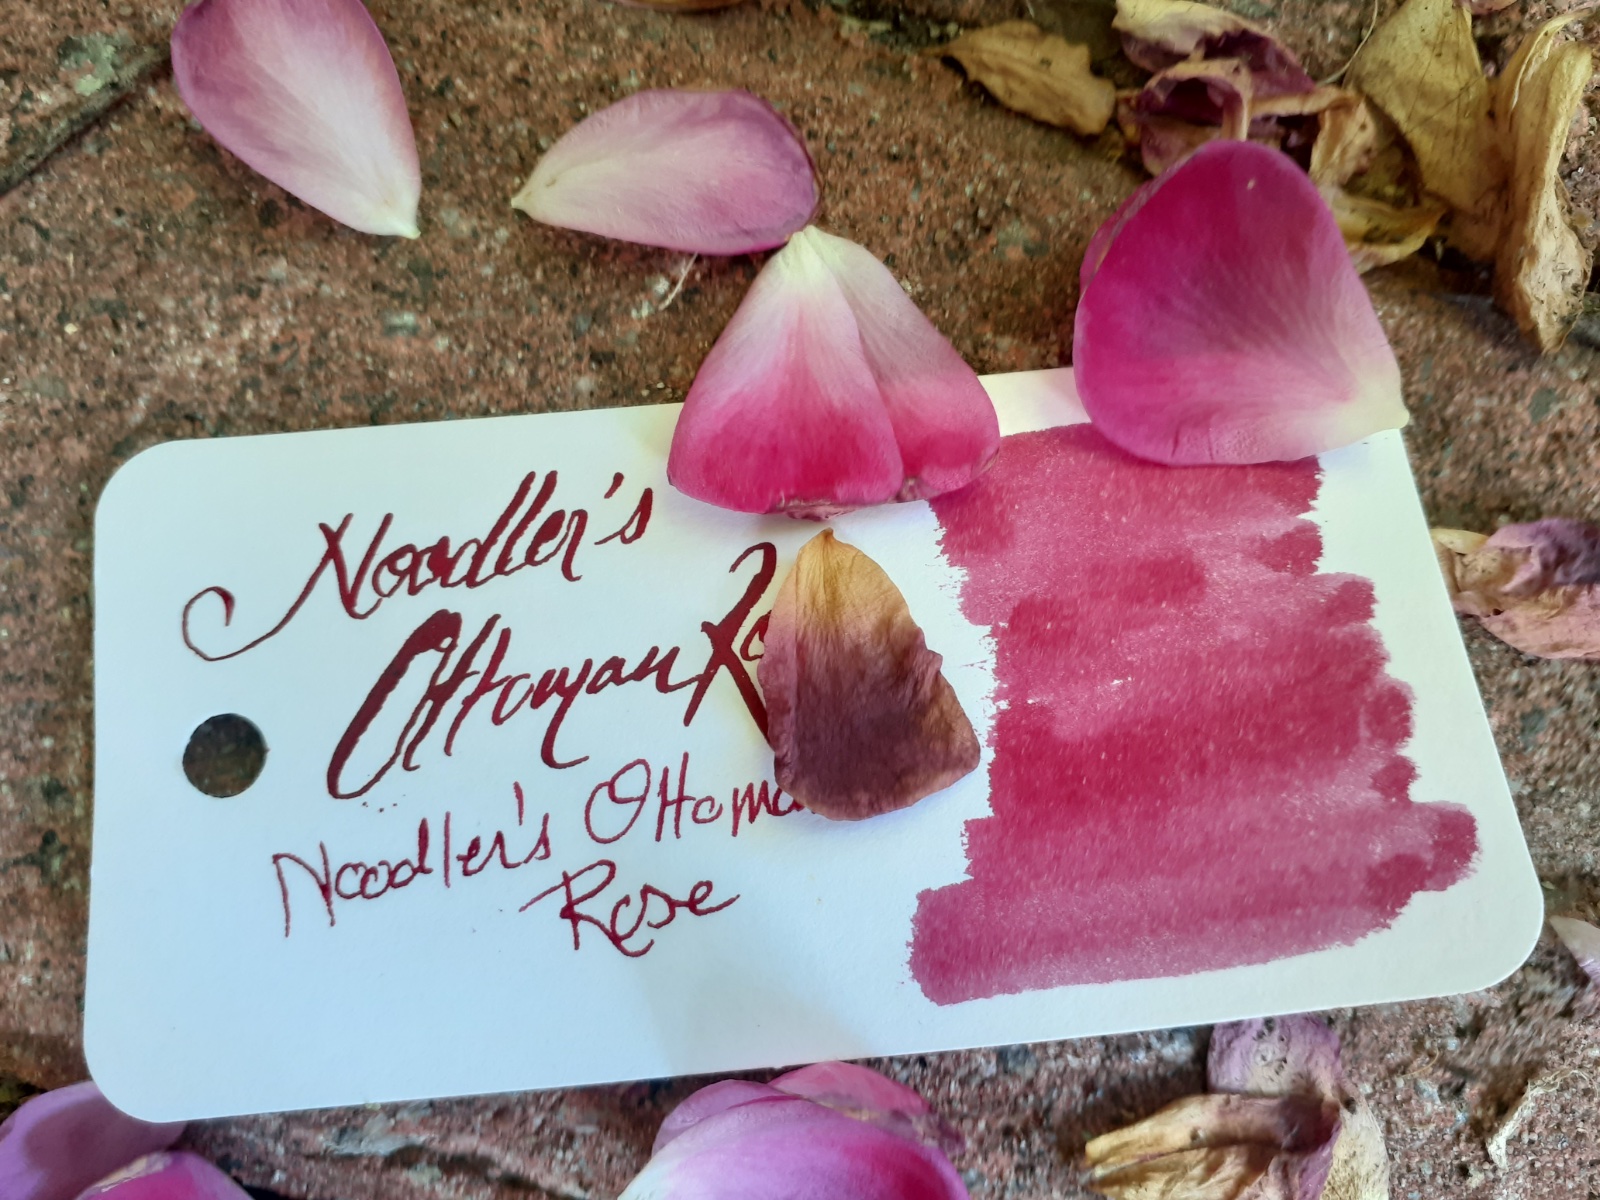 Are you looking to purchase an Noodlers Ink Roses in the Louvre